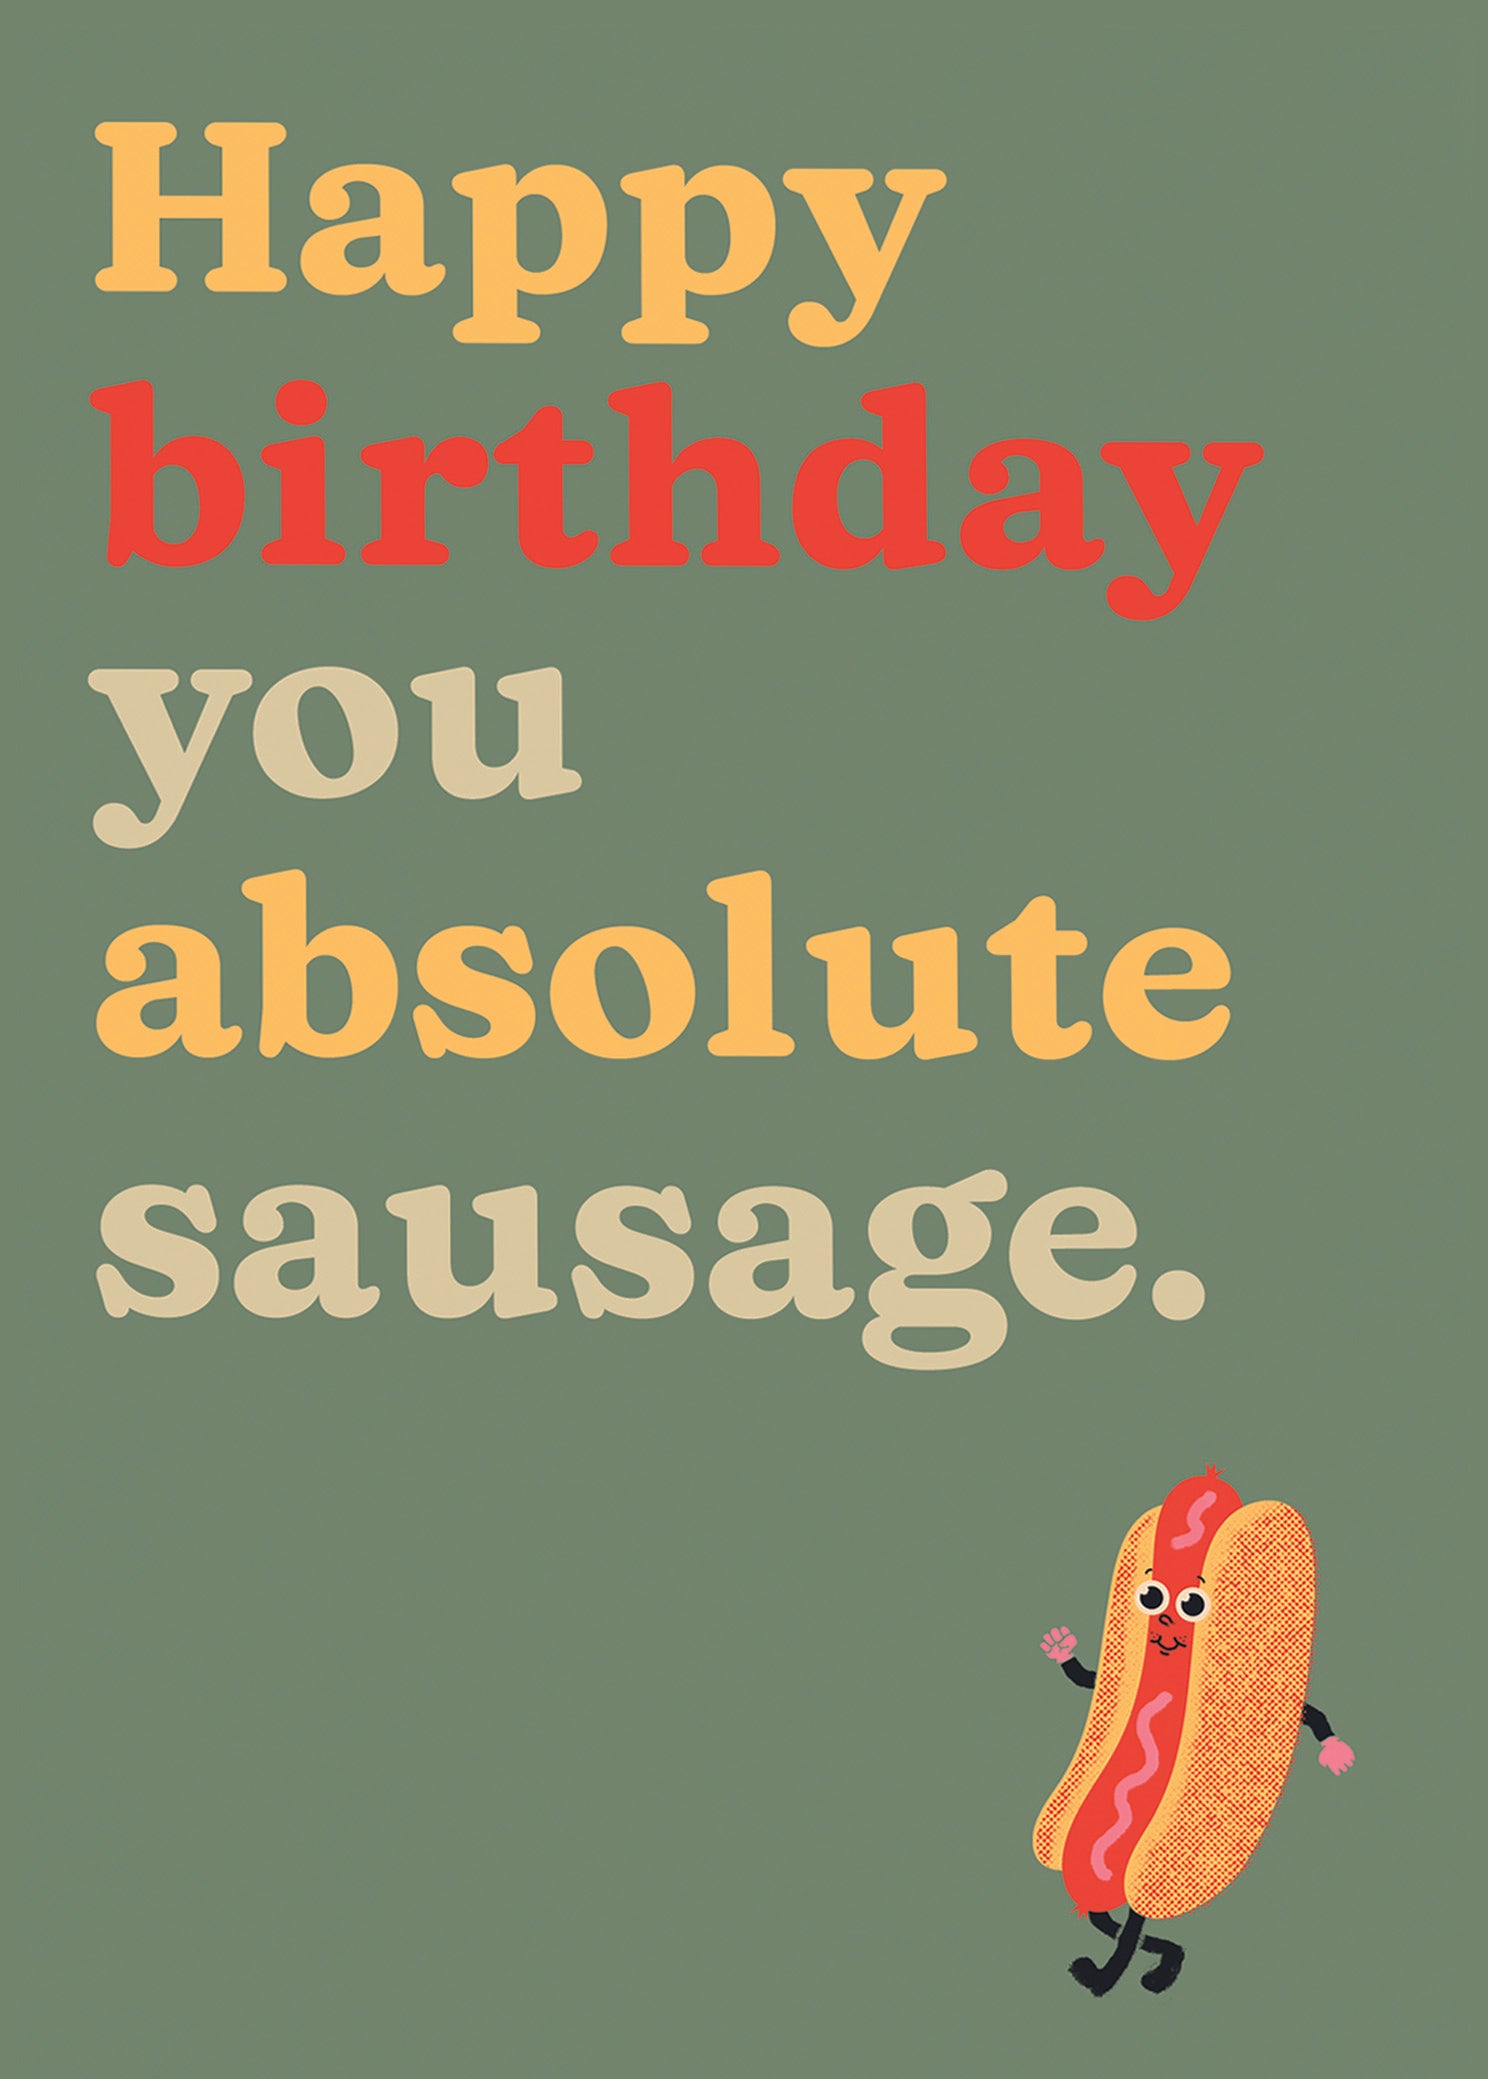 You Absolute Sausage Funny Birthday Card at Betioca at penny black